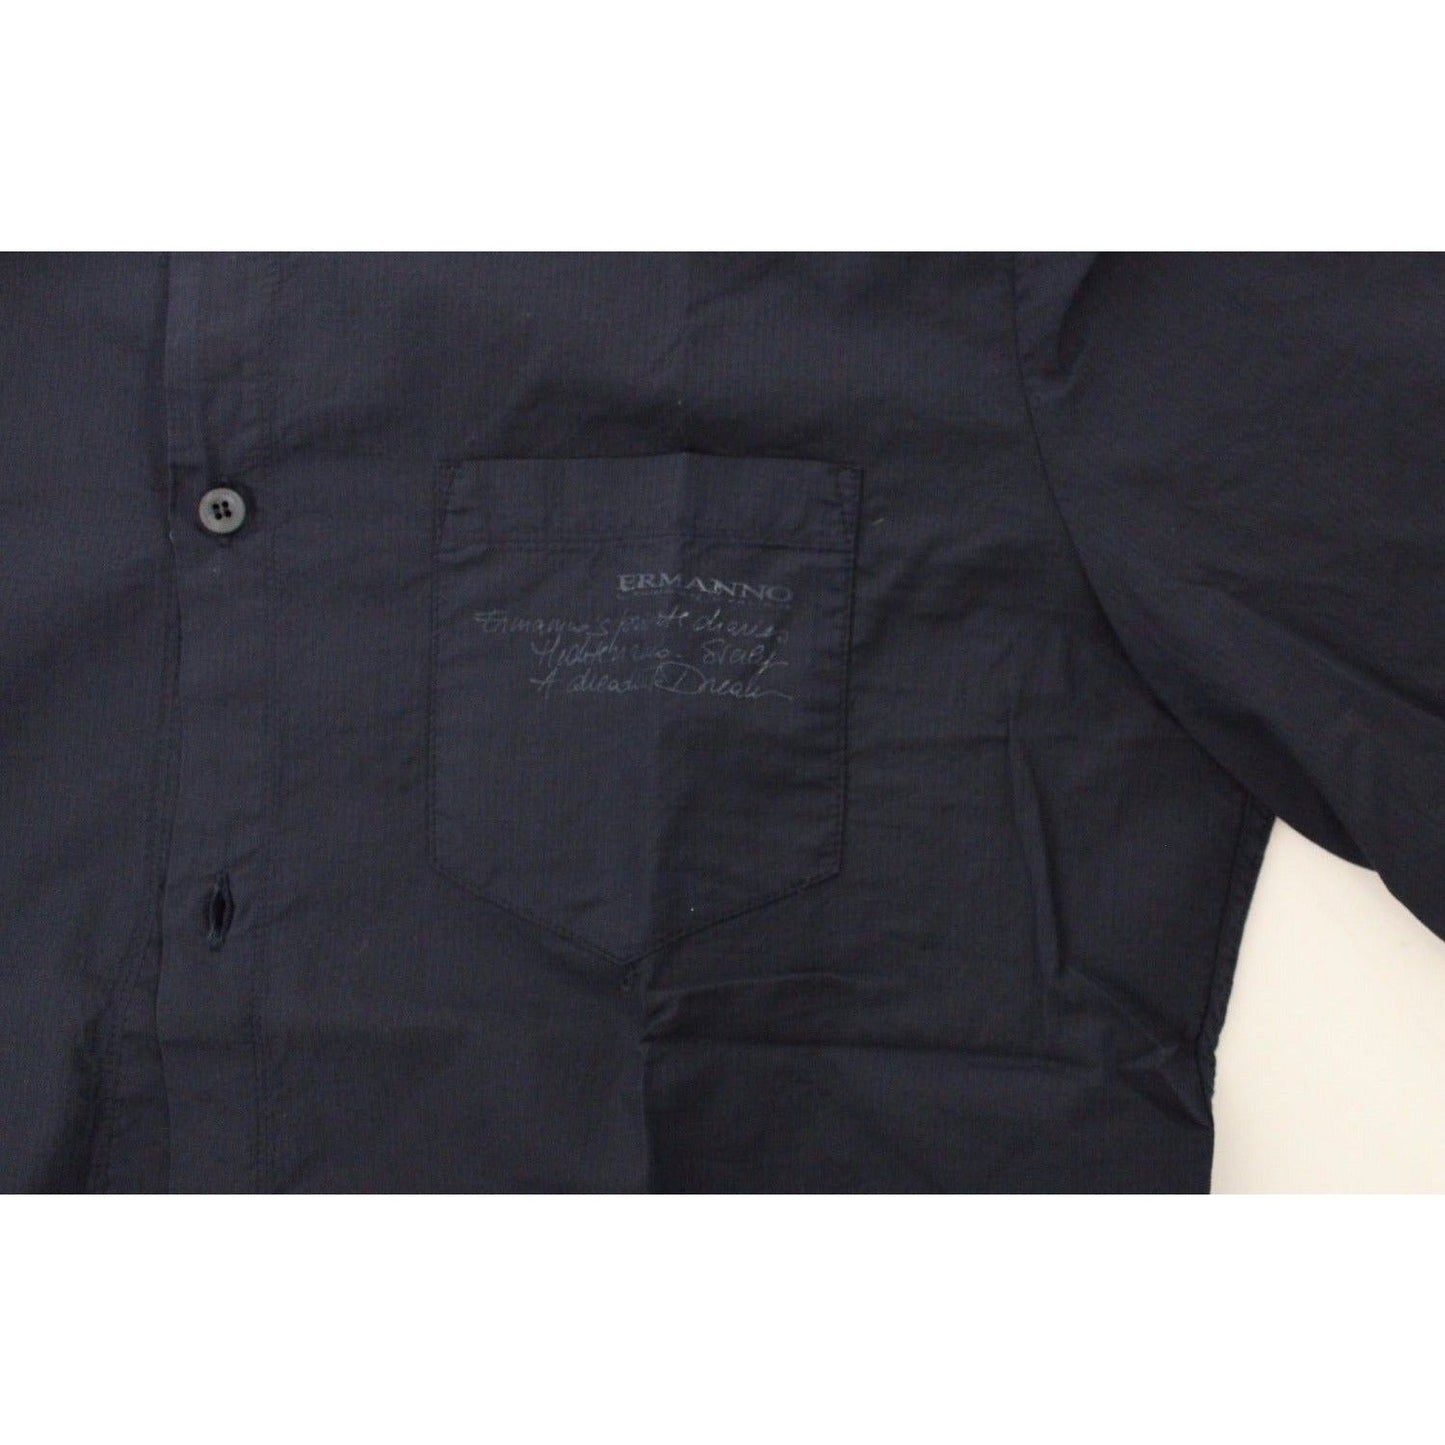 Ermanno Scervino Stunning Blue Cotton Casual Shirt MAN SHIRTS blue-cotton-casual-long-sleeve-shirt-top